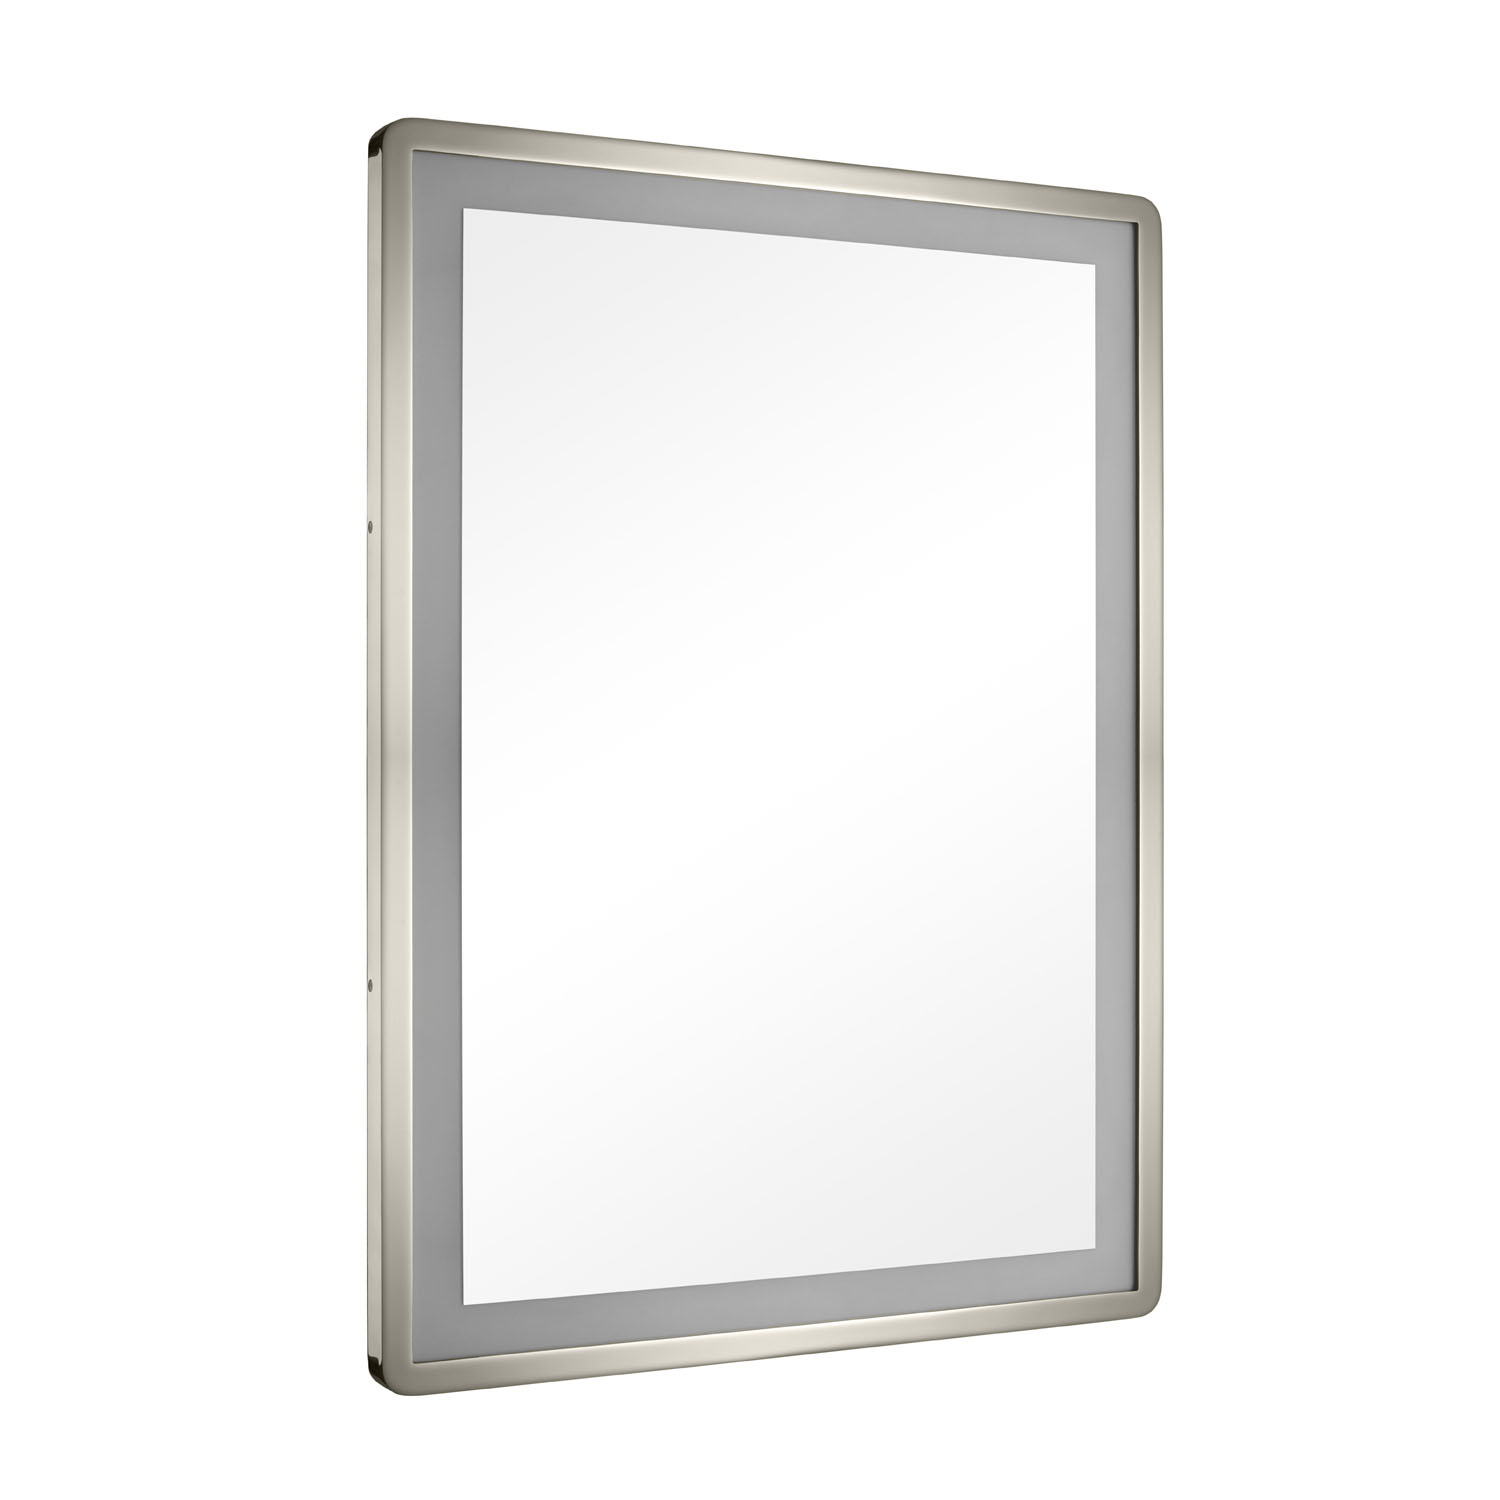 The Clarendon Medicine Cabinet Mirror Designed by Suzy Hoodless